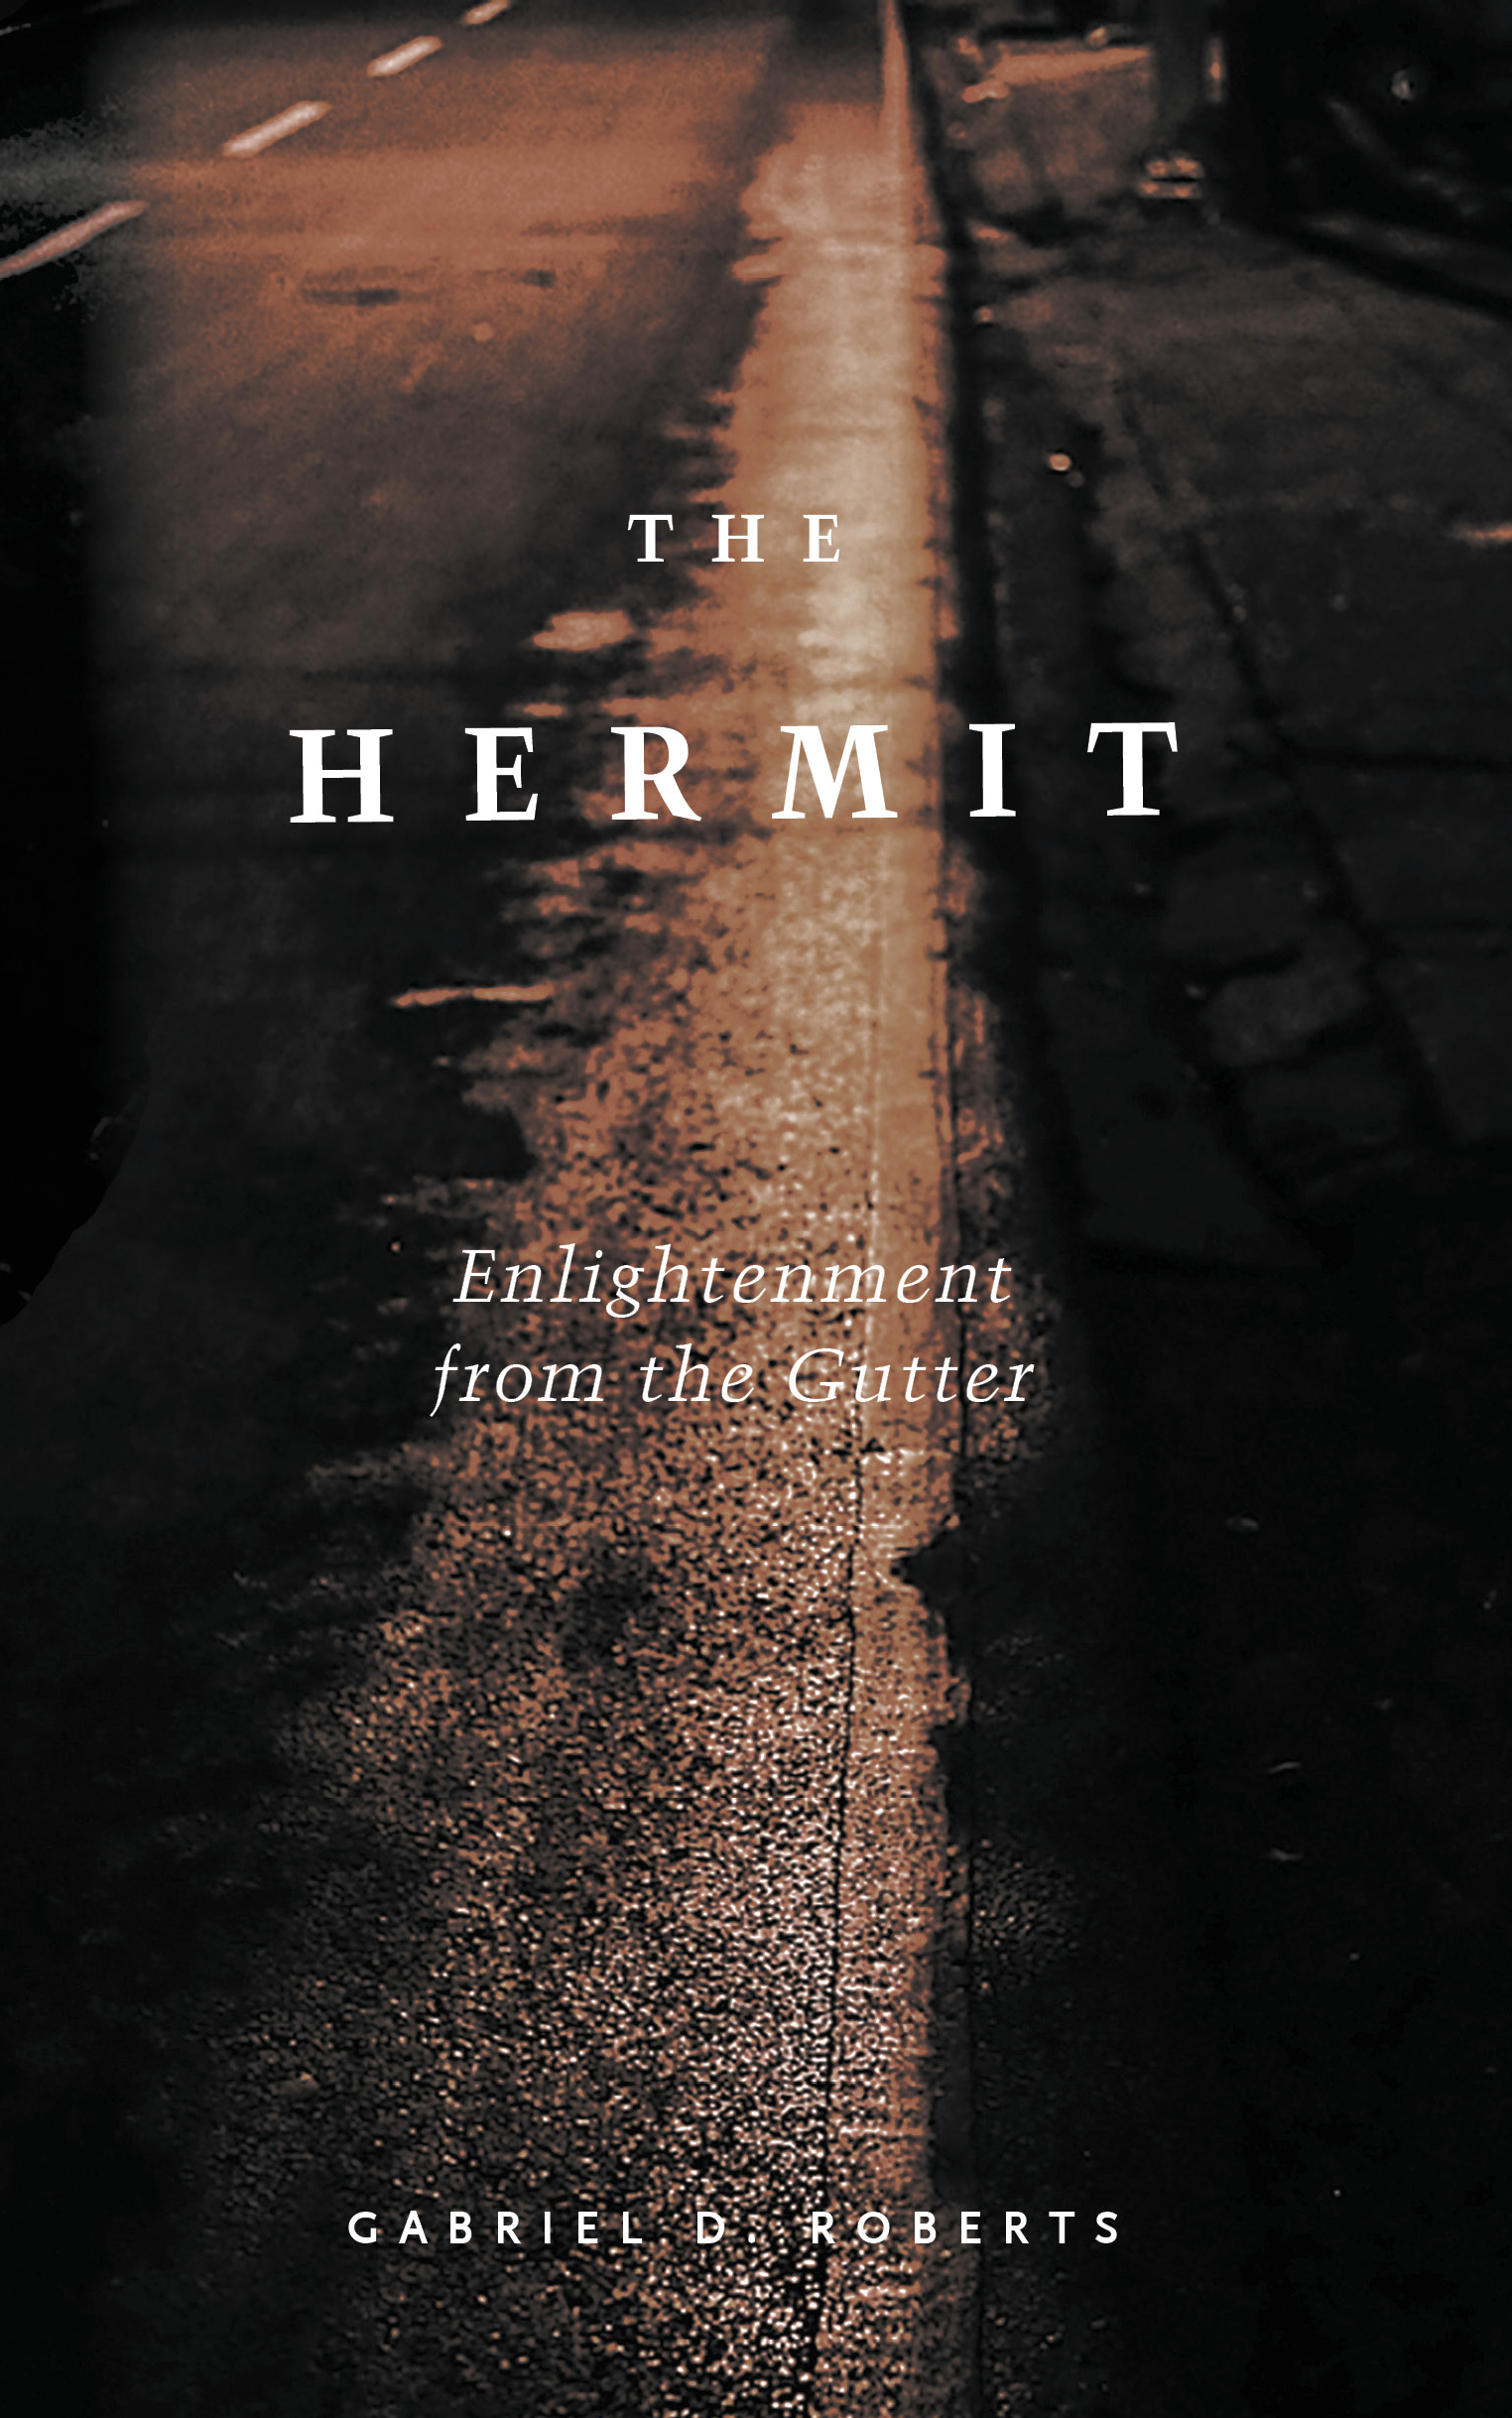 The Hermit: Enlightenment from the Gutter